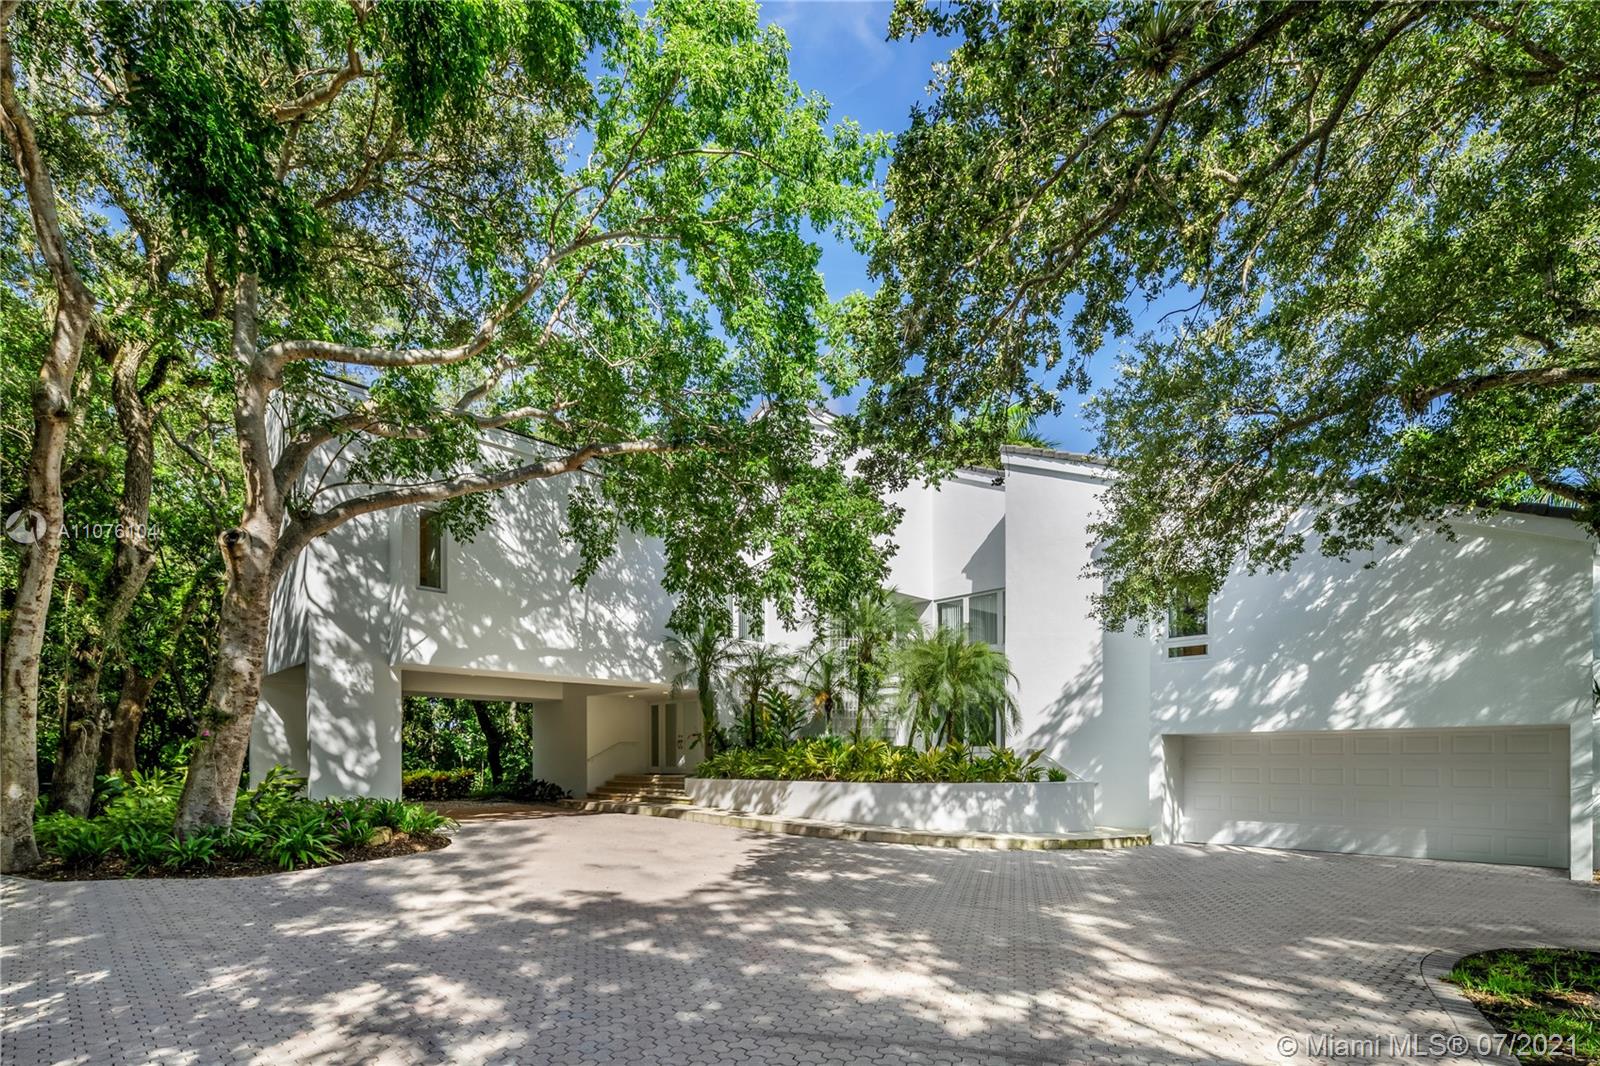 Photo 1 of 9191 Old Cutler Rd in Coral Gables - MLS A11076104